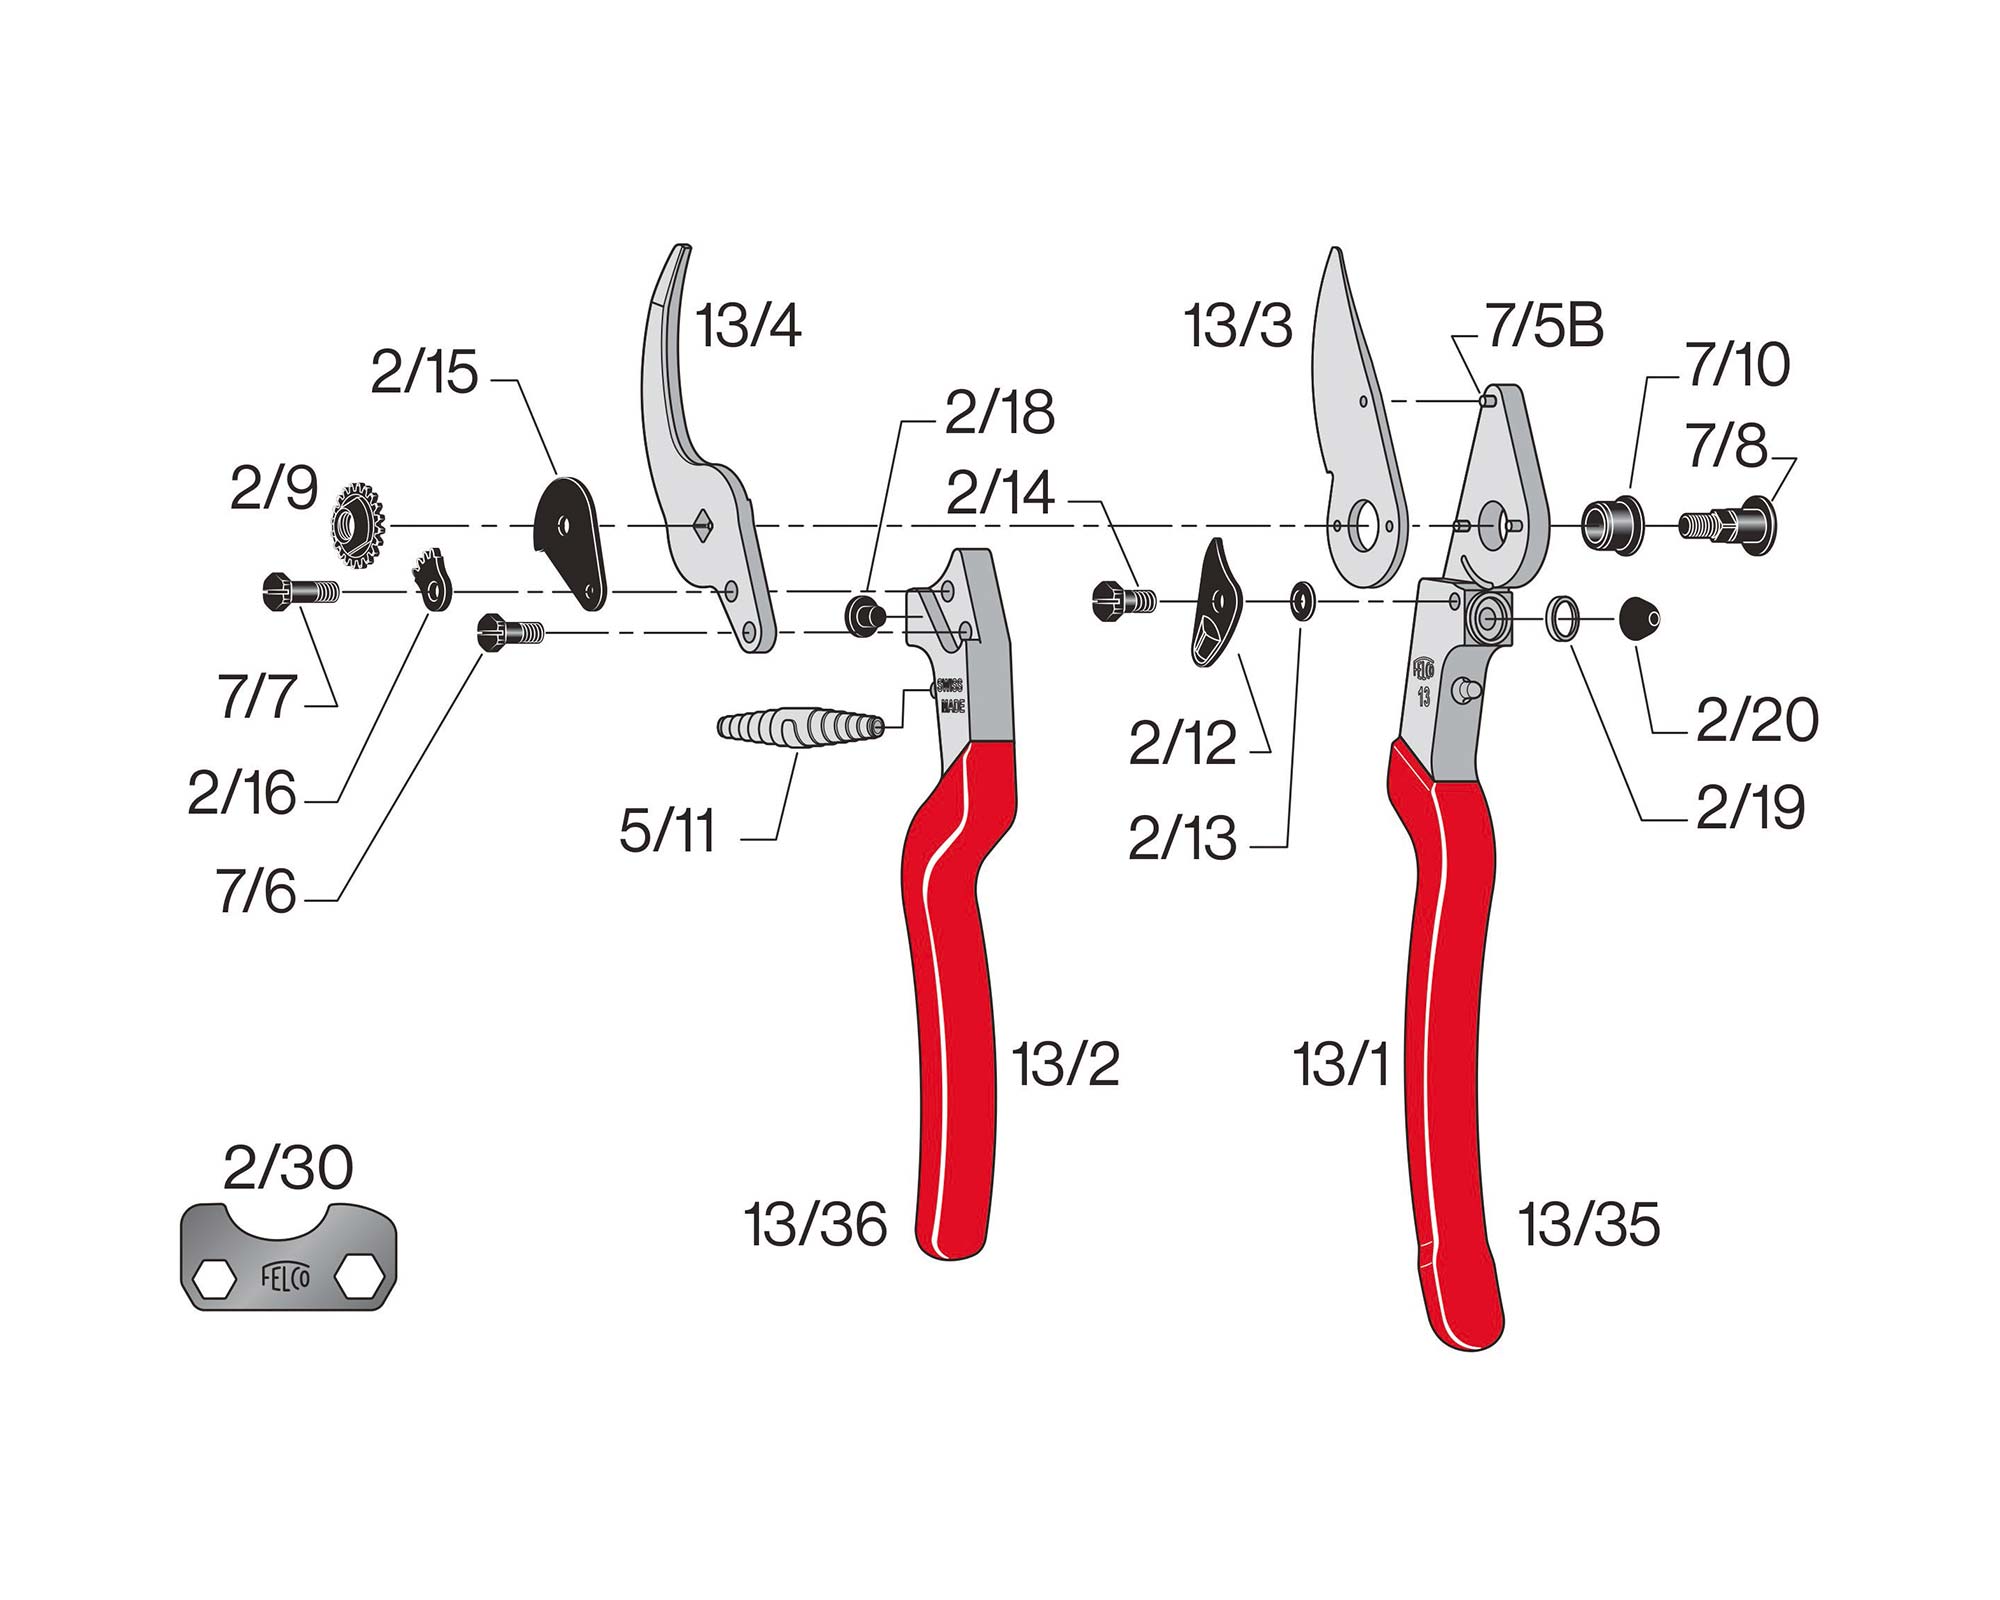 Exploded parts diagram for Felco 13 secateurs